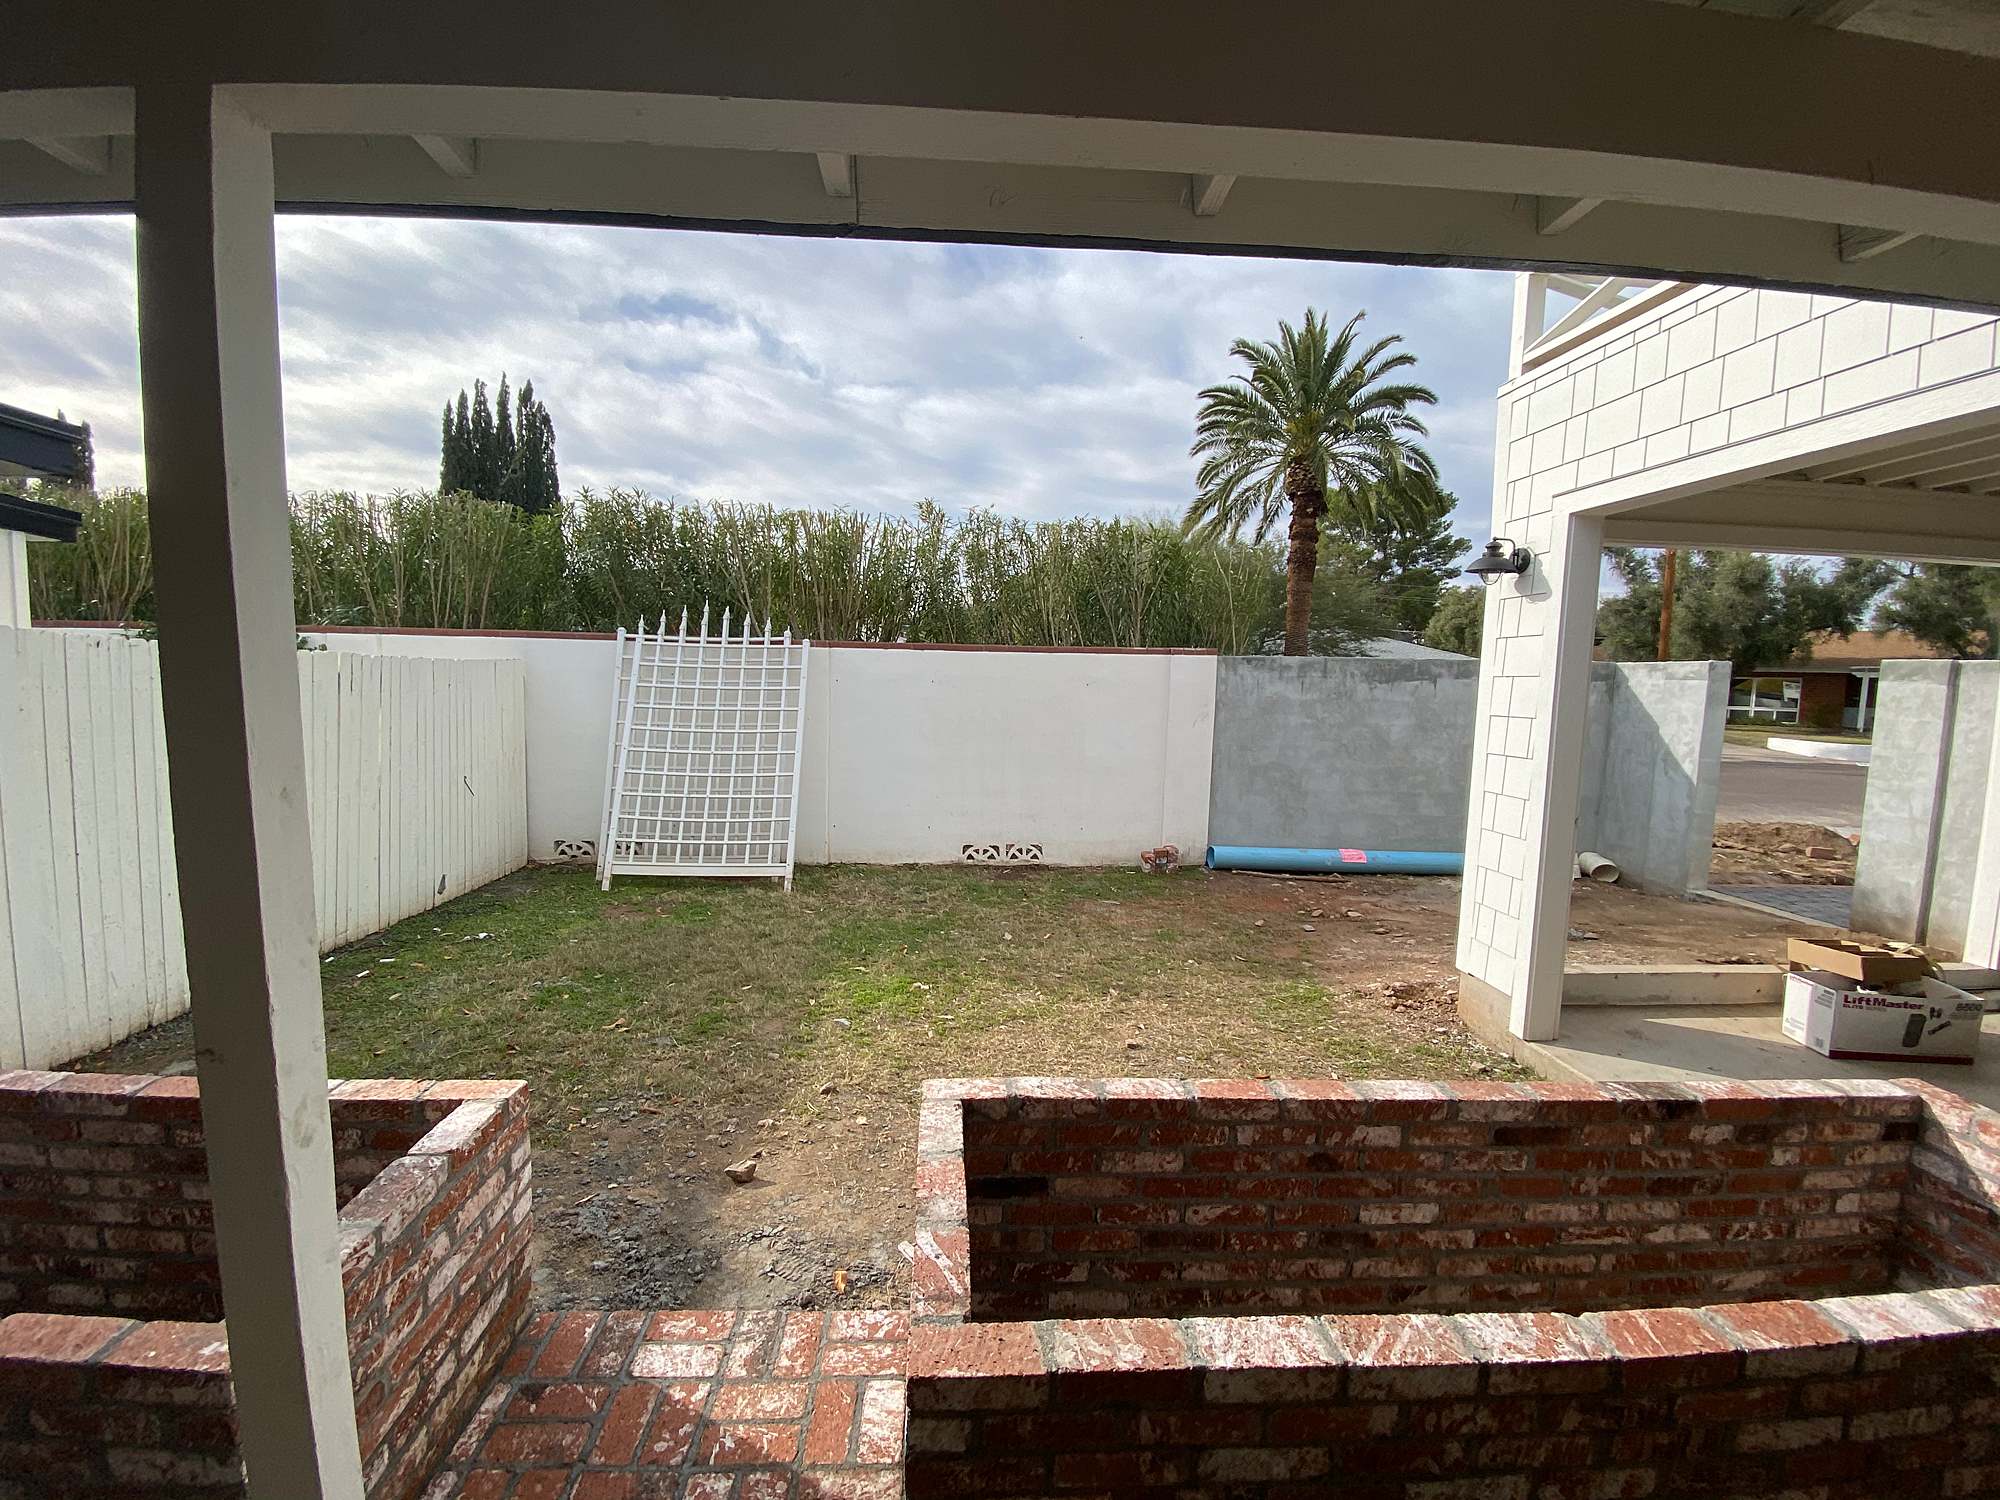 adding on to the cinderblock wall to make the new garden area - see the blog post for the after progression photos #homeimprovement #garden